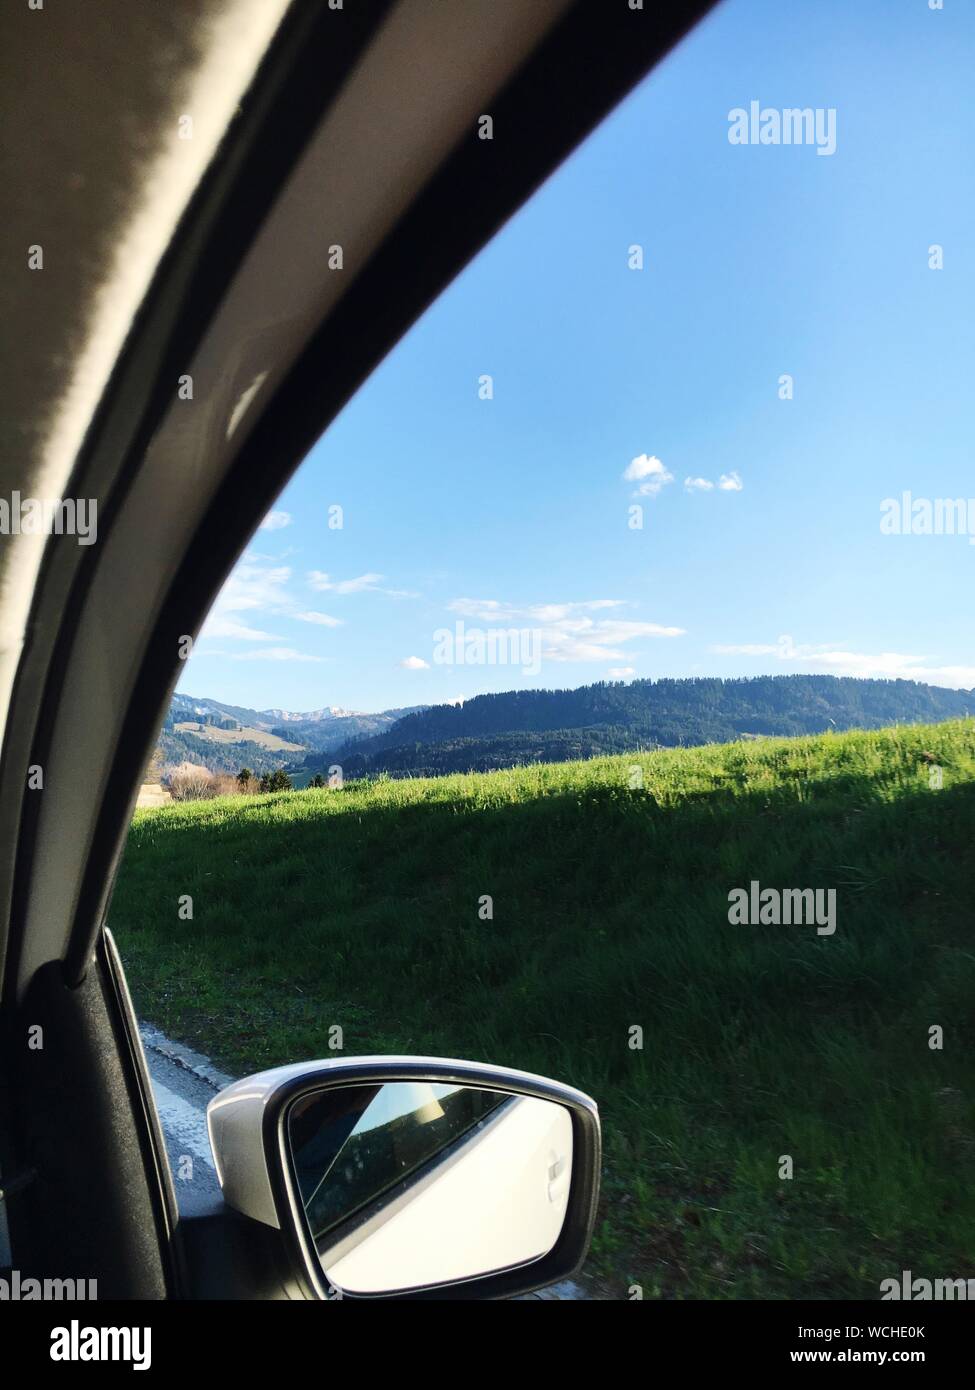 View Of Side-view Mirror Stock Photo